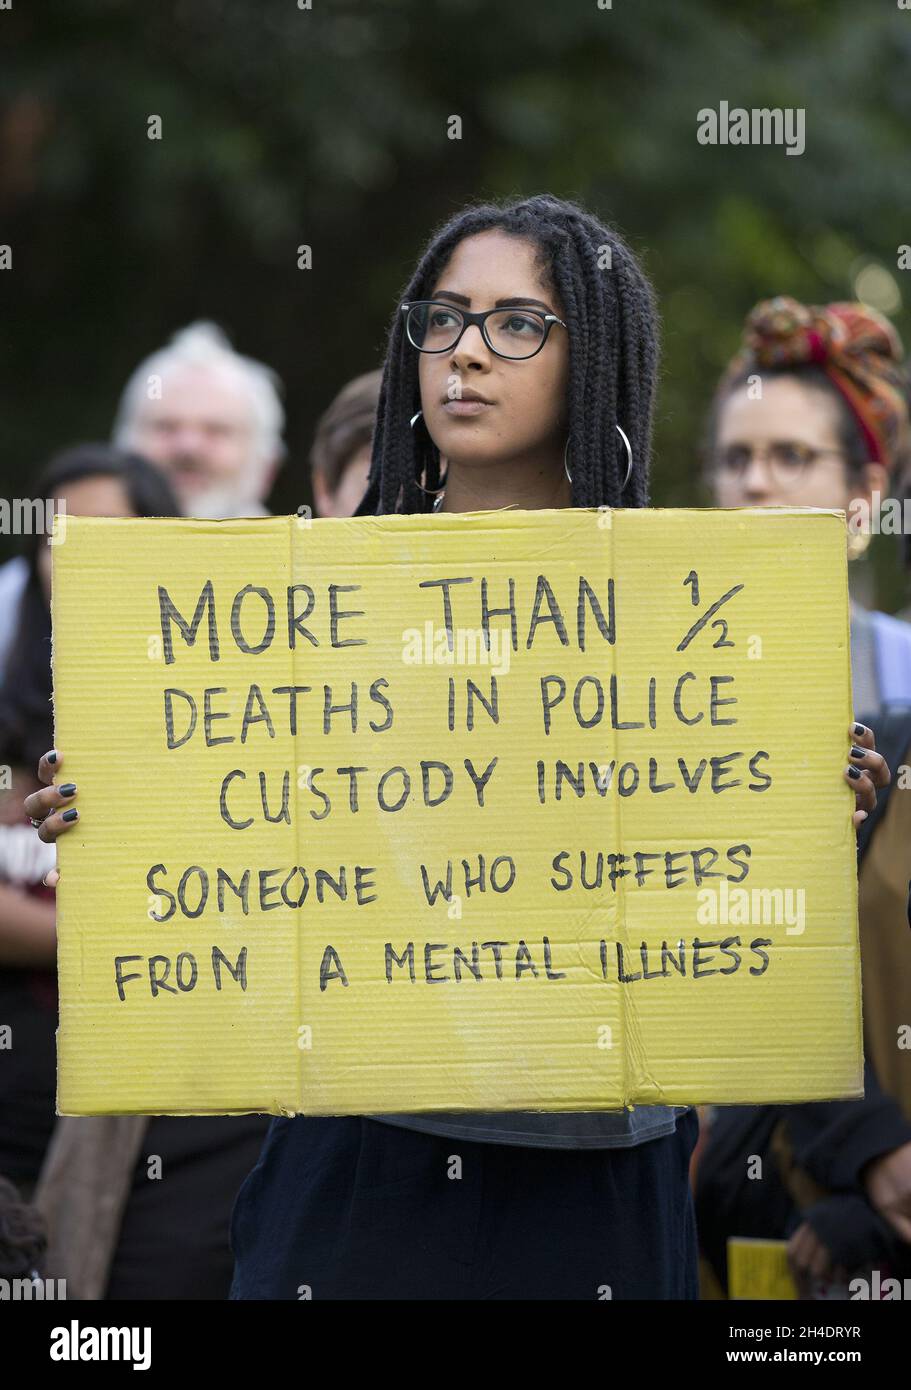 Activists from Black Lives Matter movement demonstrate in Altab Ali Park, east London, to coincide with the fifth anniversary of the fatal shooting of Mark Duggan by police in north London, sparking riots which spread across the UK. Stock Photo